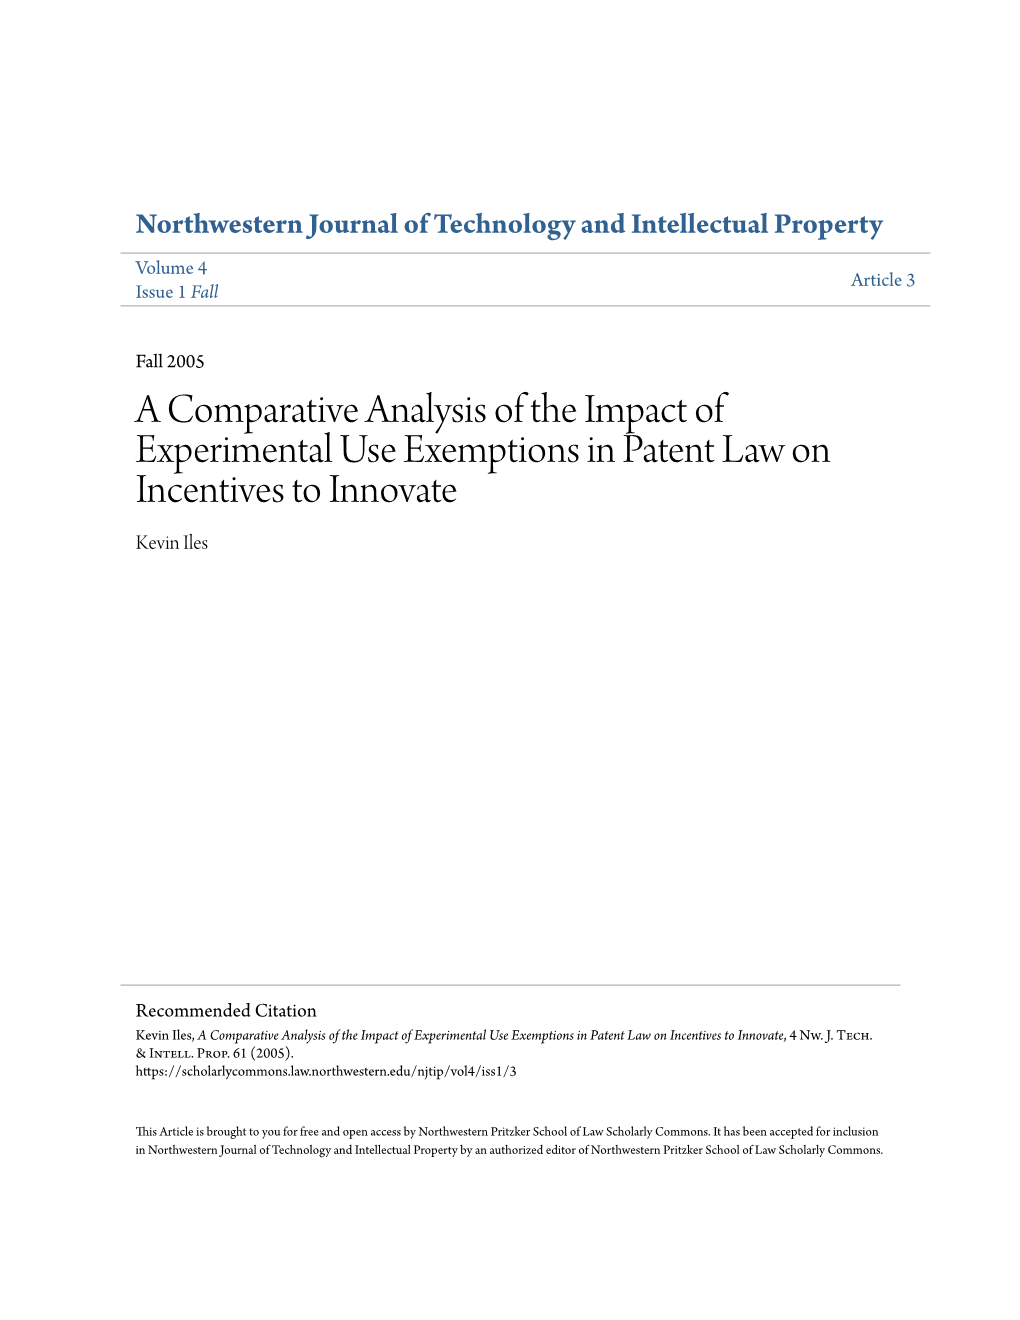 A Comparative Analysis of the Impact of Experimental Use Exemptions in Patent Law on Incentives to Innovate Kevin Iles